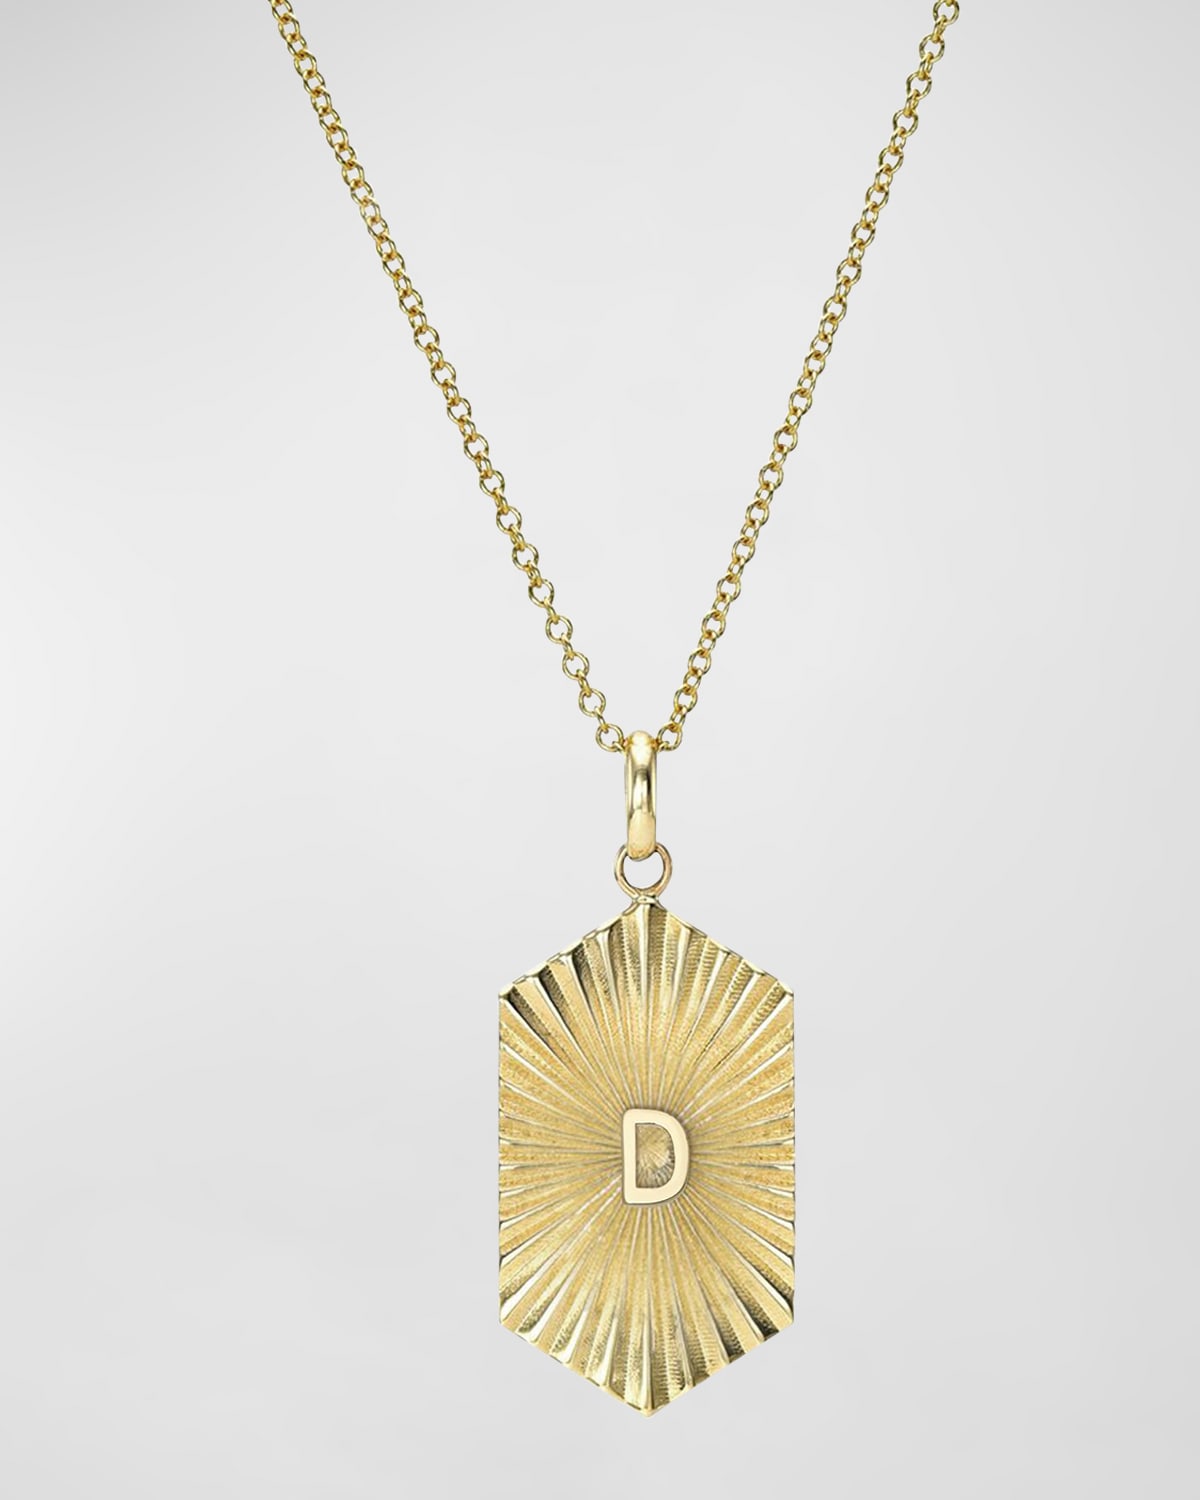 Zoe Lev Jewelry 14k Gold Pleated Shield With Initial Necklace In D